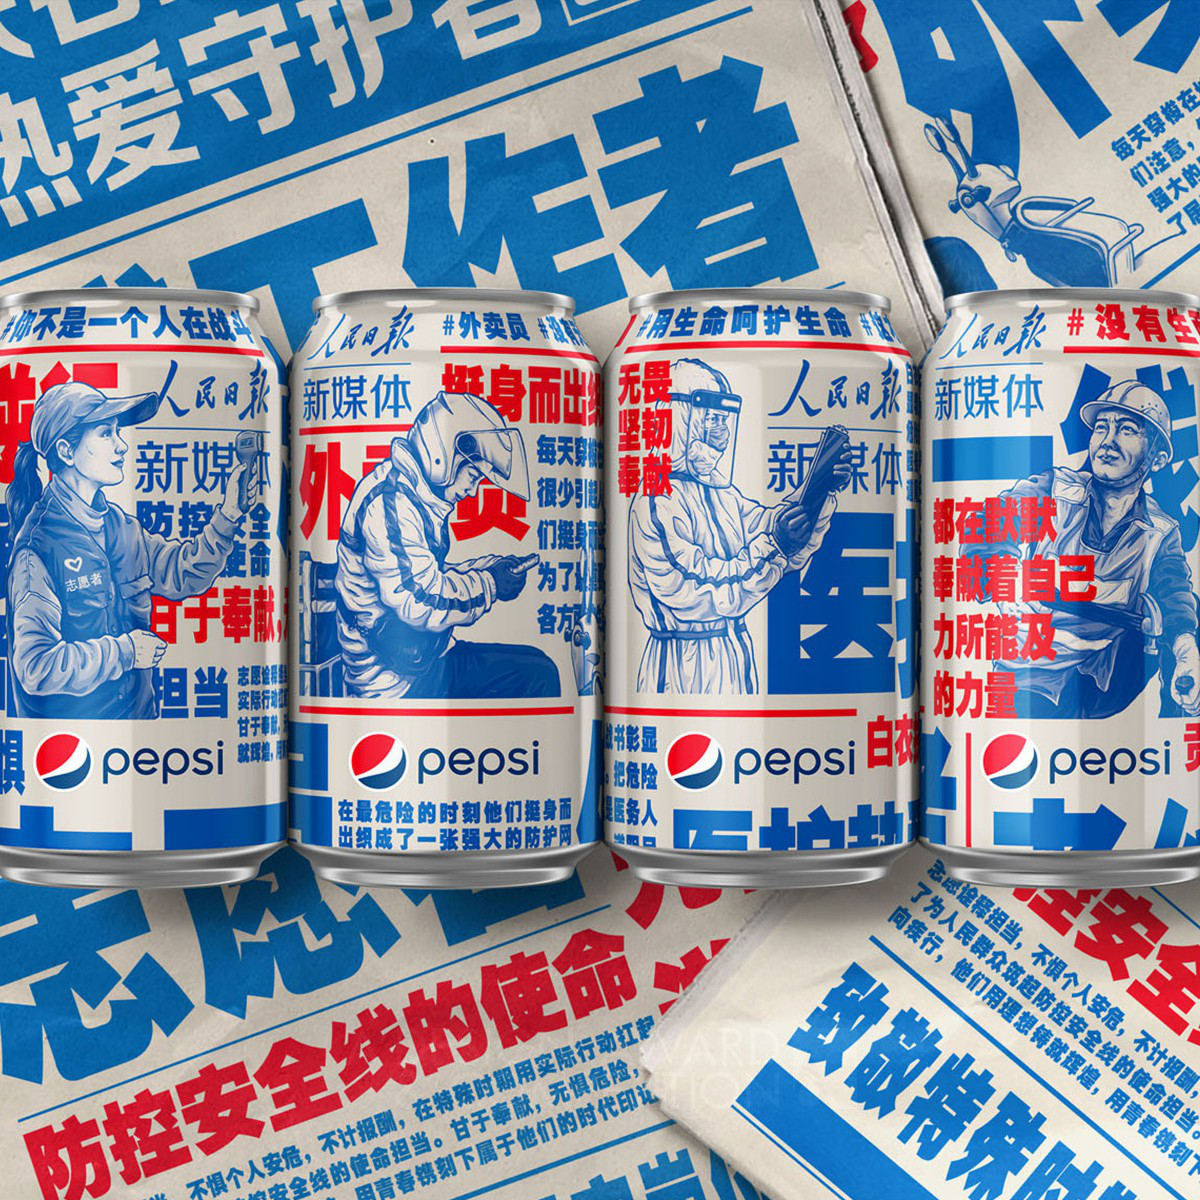 Pepsi Chinas People Daily New Media  Beverage by PepsiCo Design and Innovation